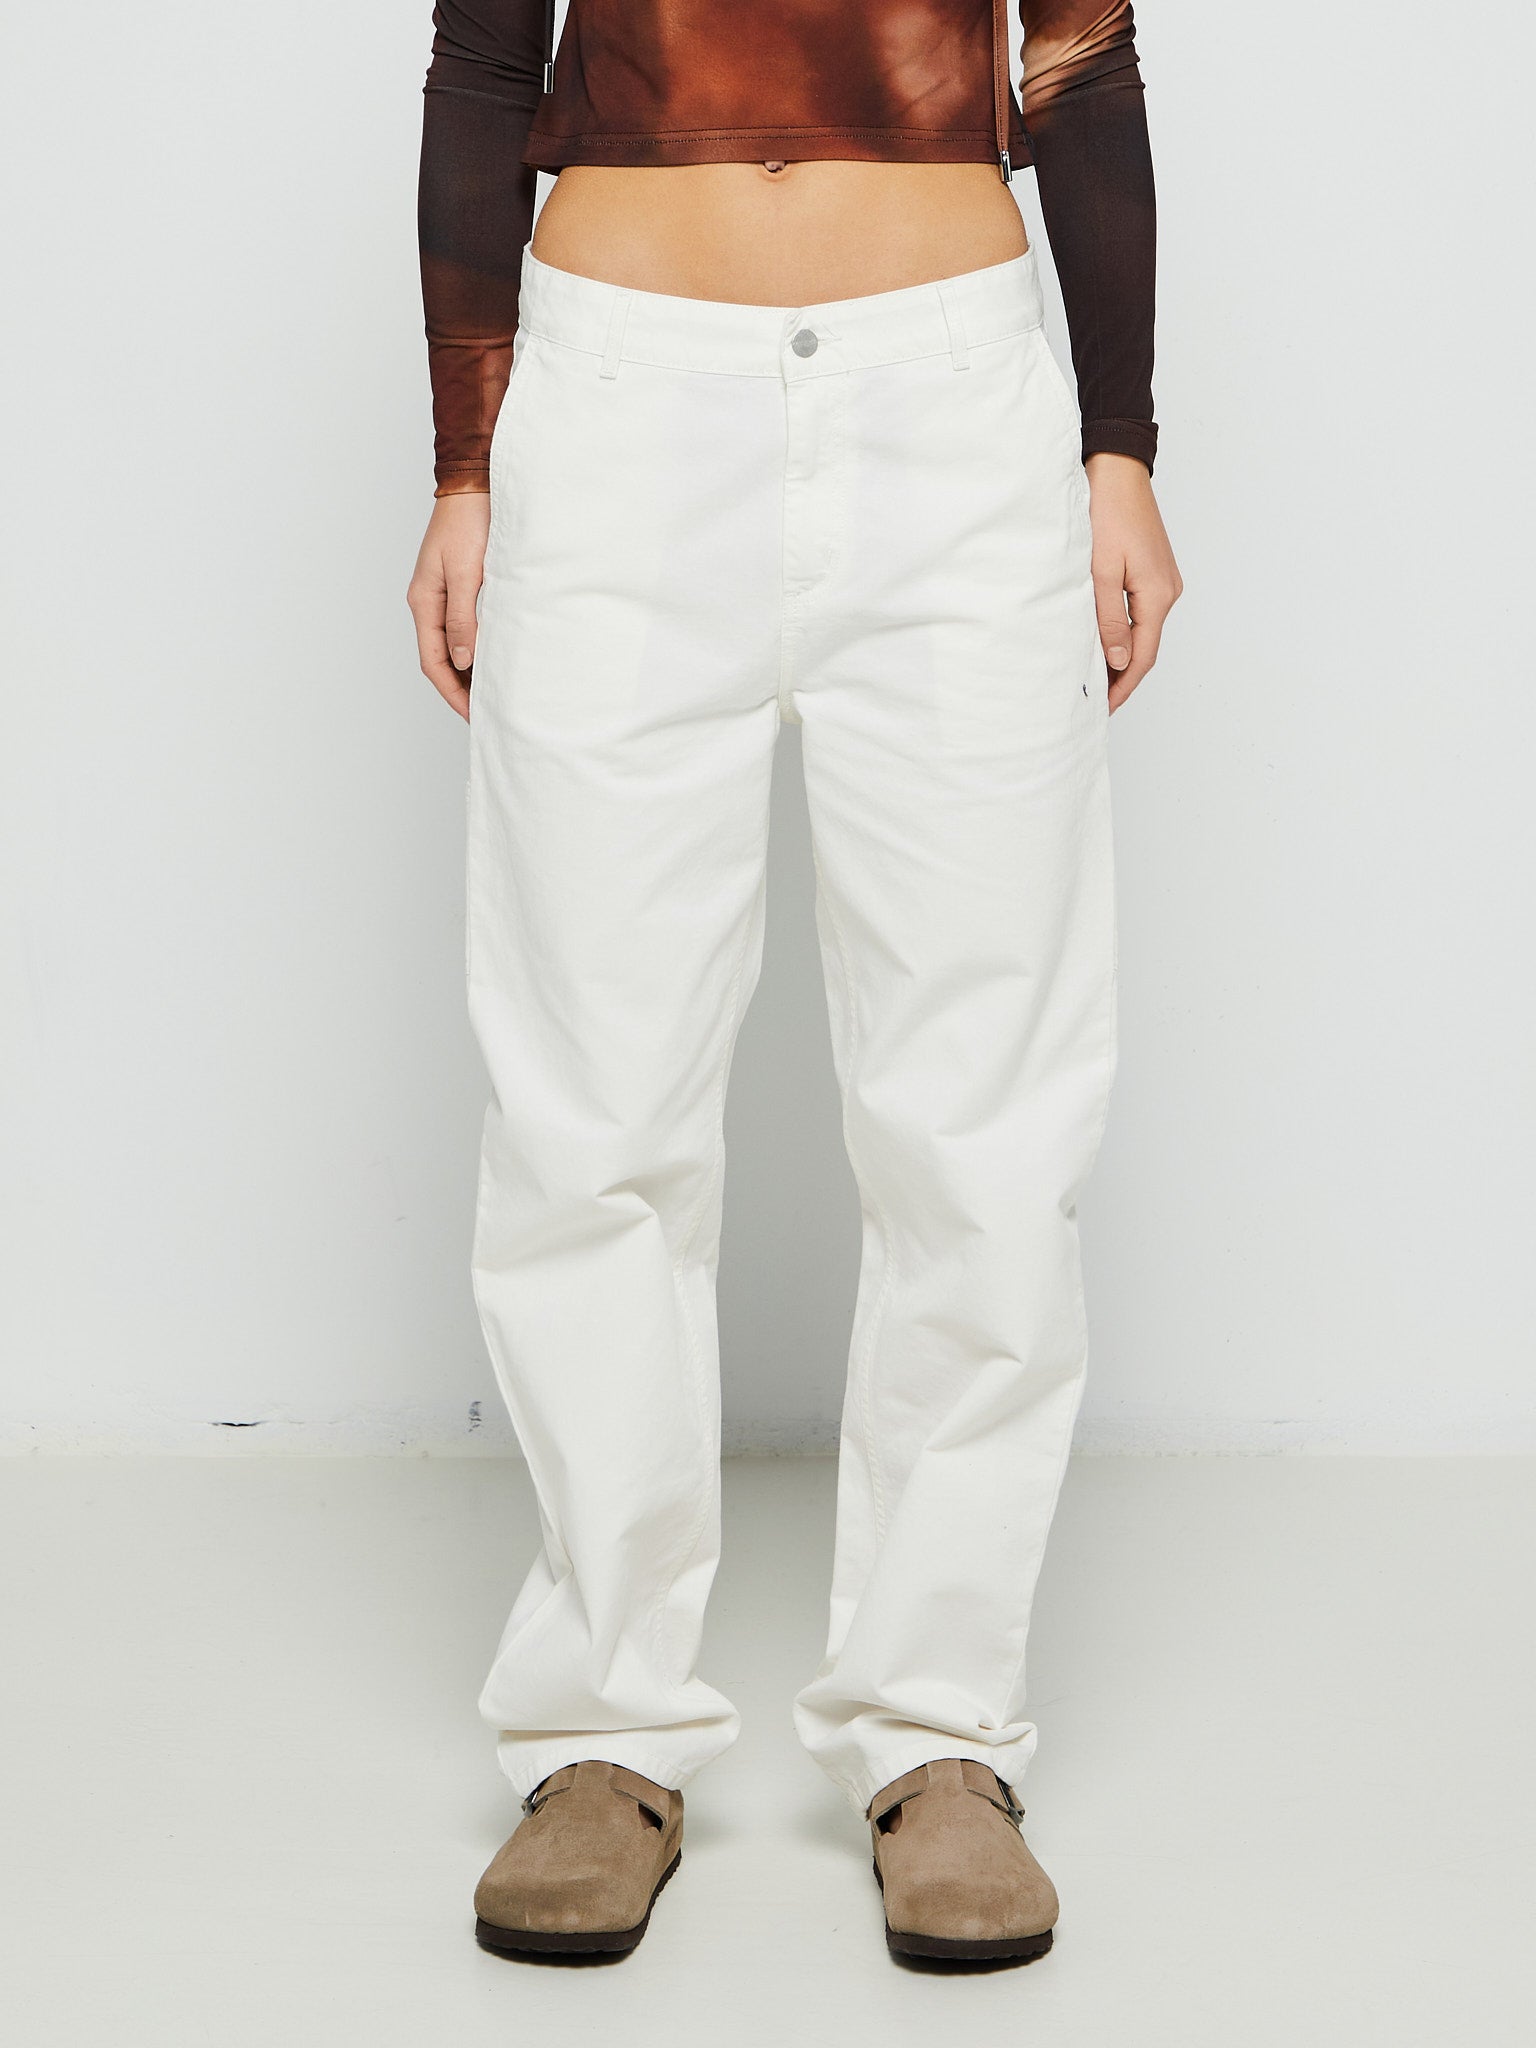 Carhartt - W' Newcomb Pierce Pants in Off-White